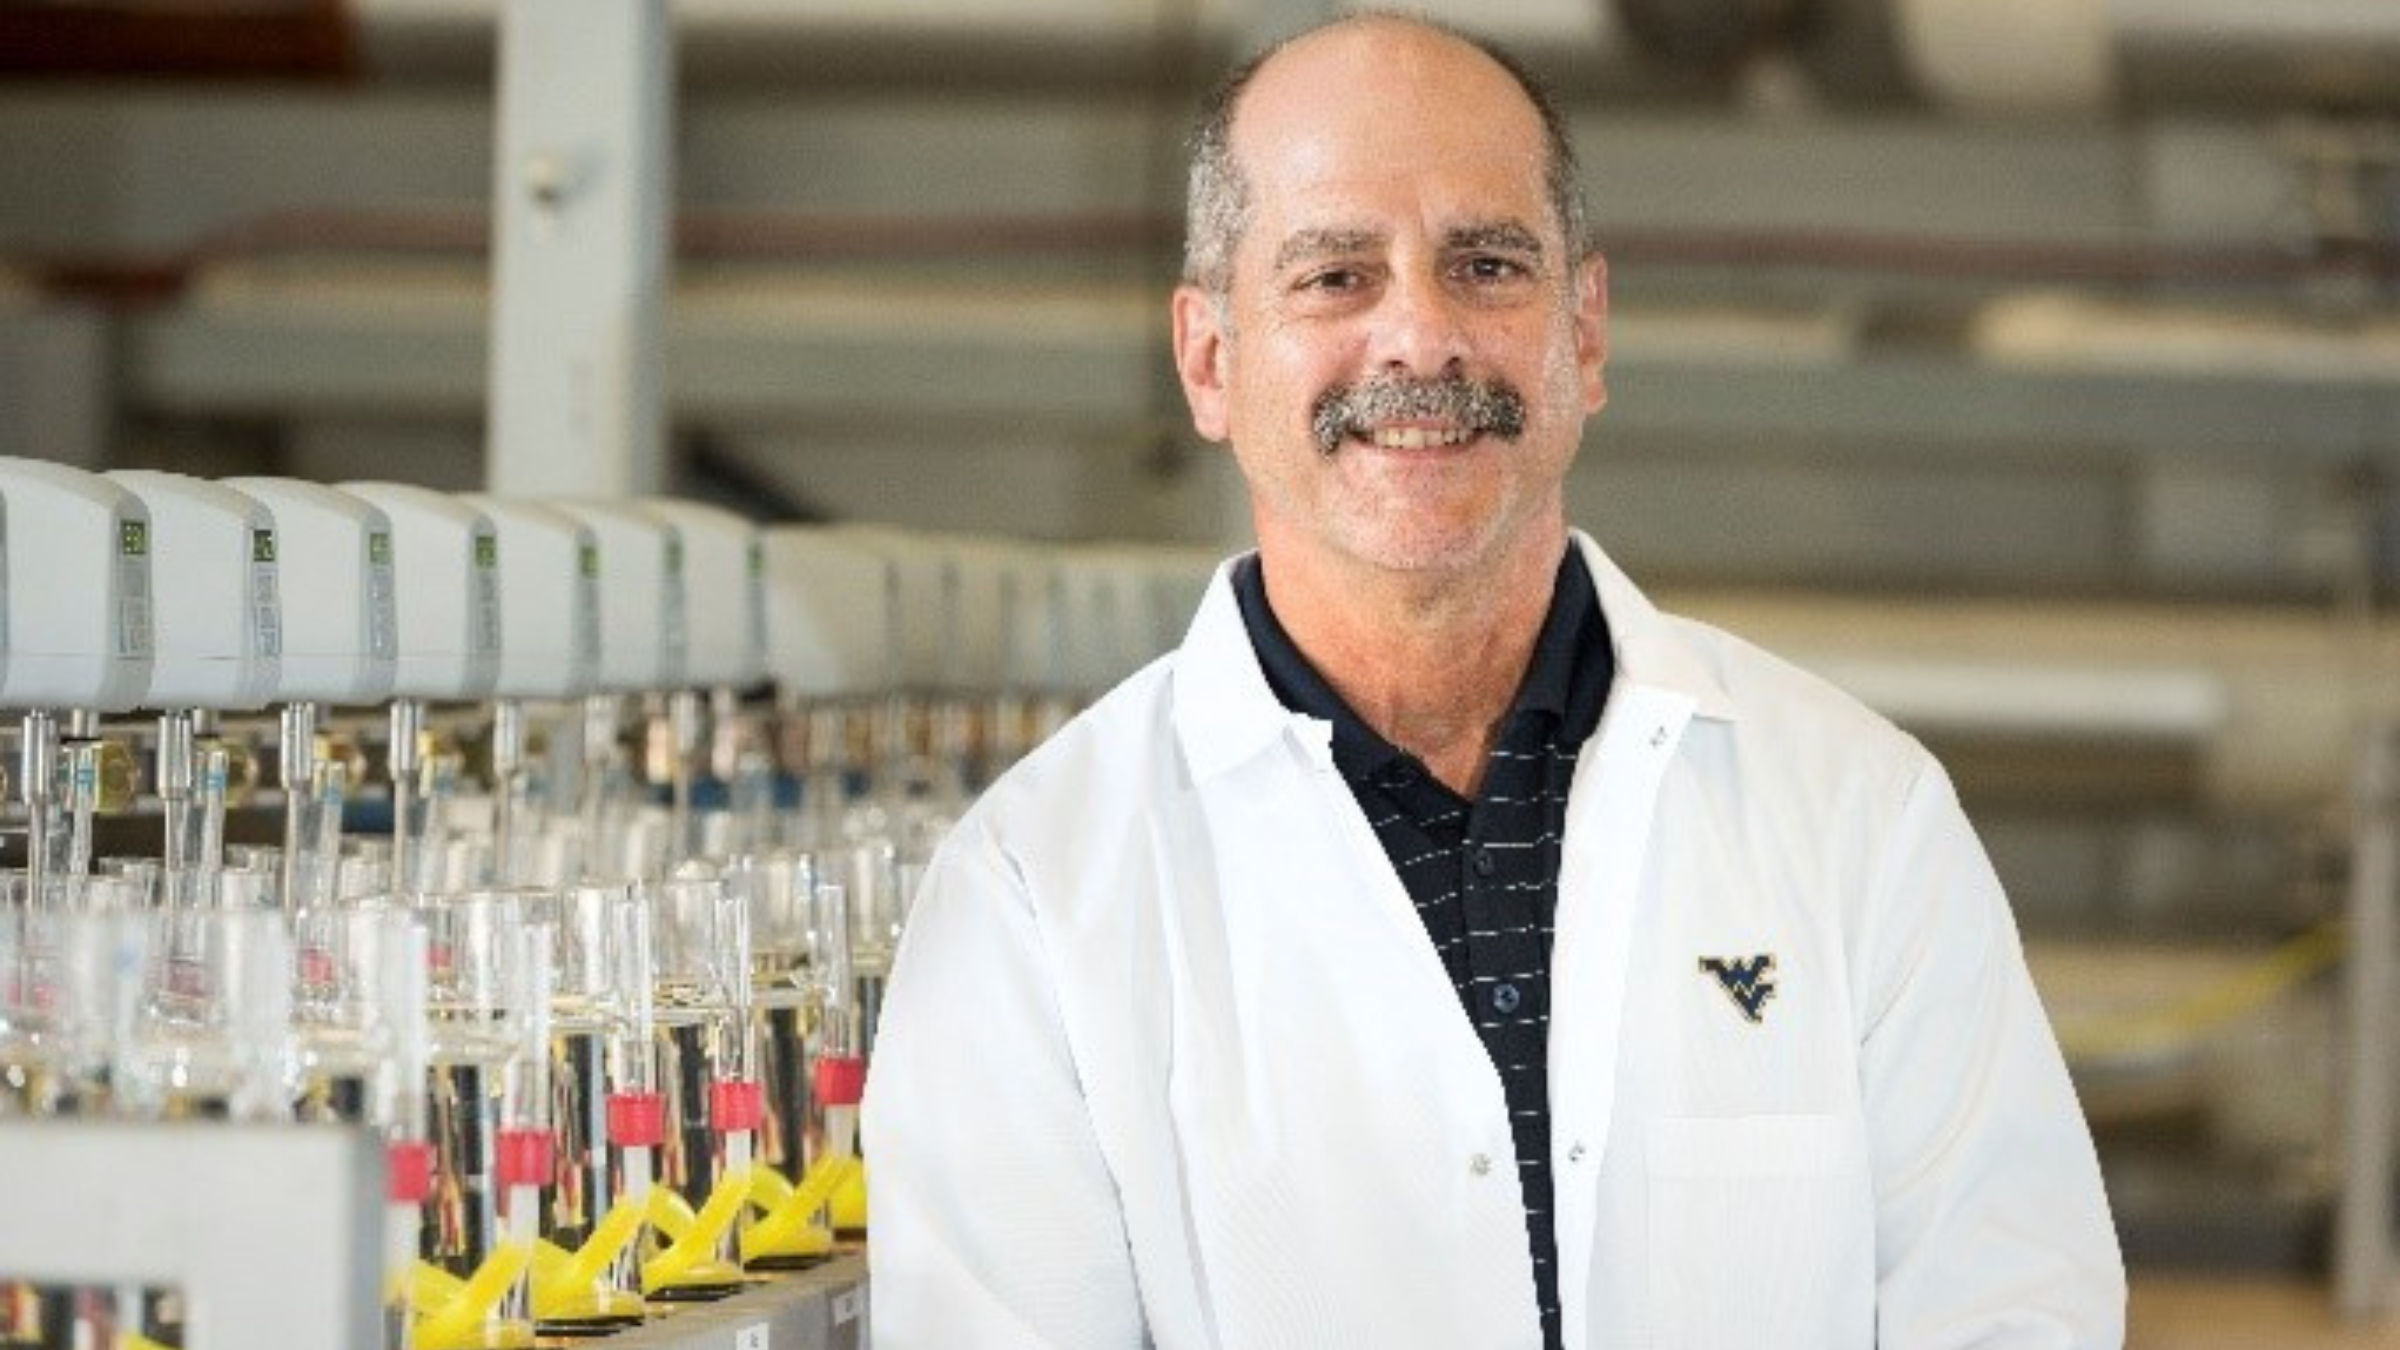 Male professor in white lab coat smiling in front of science lab equipment 